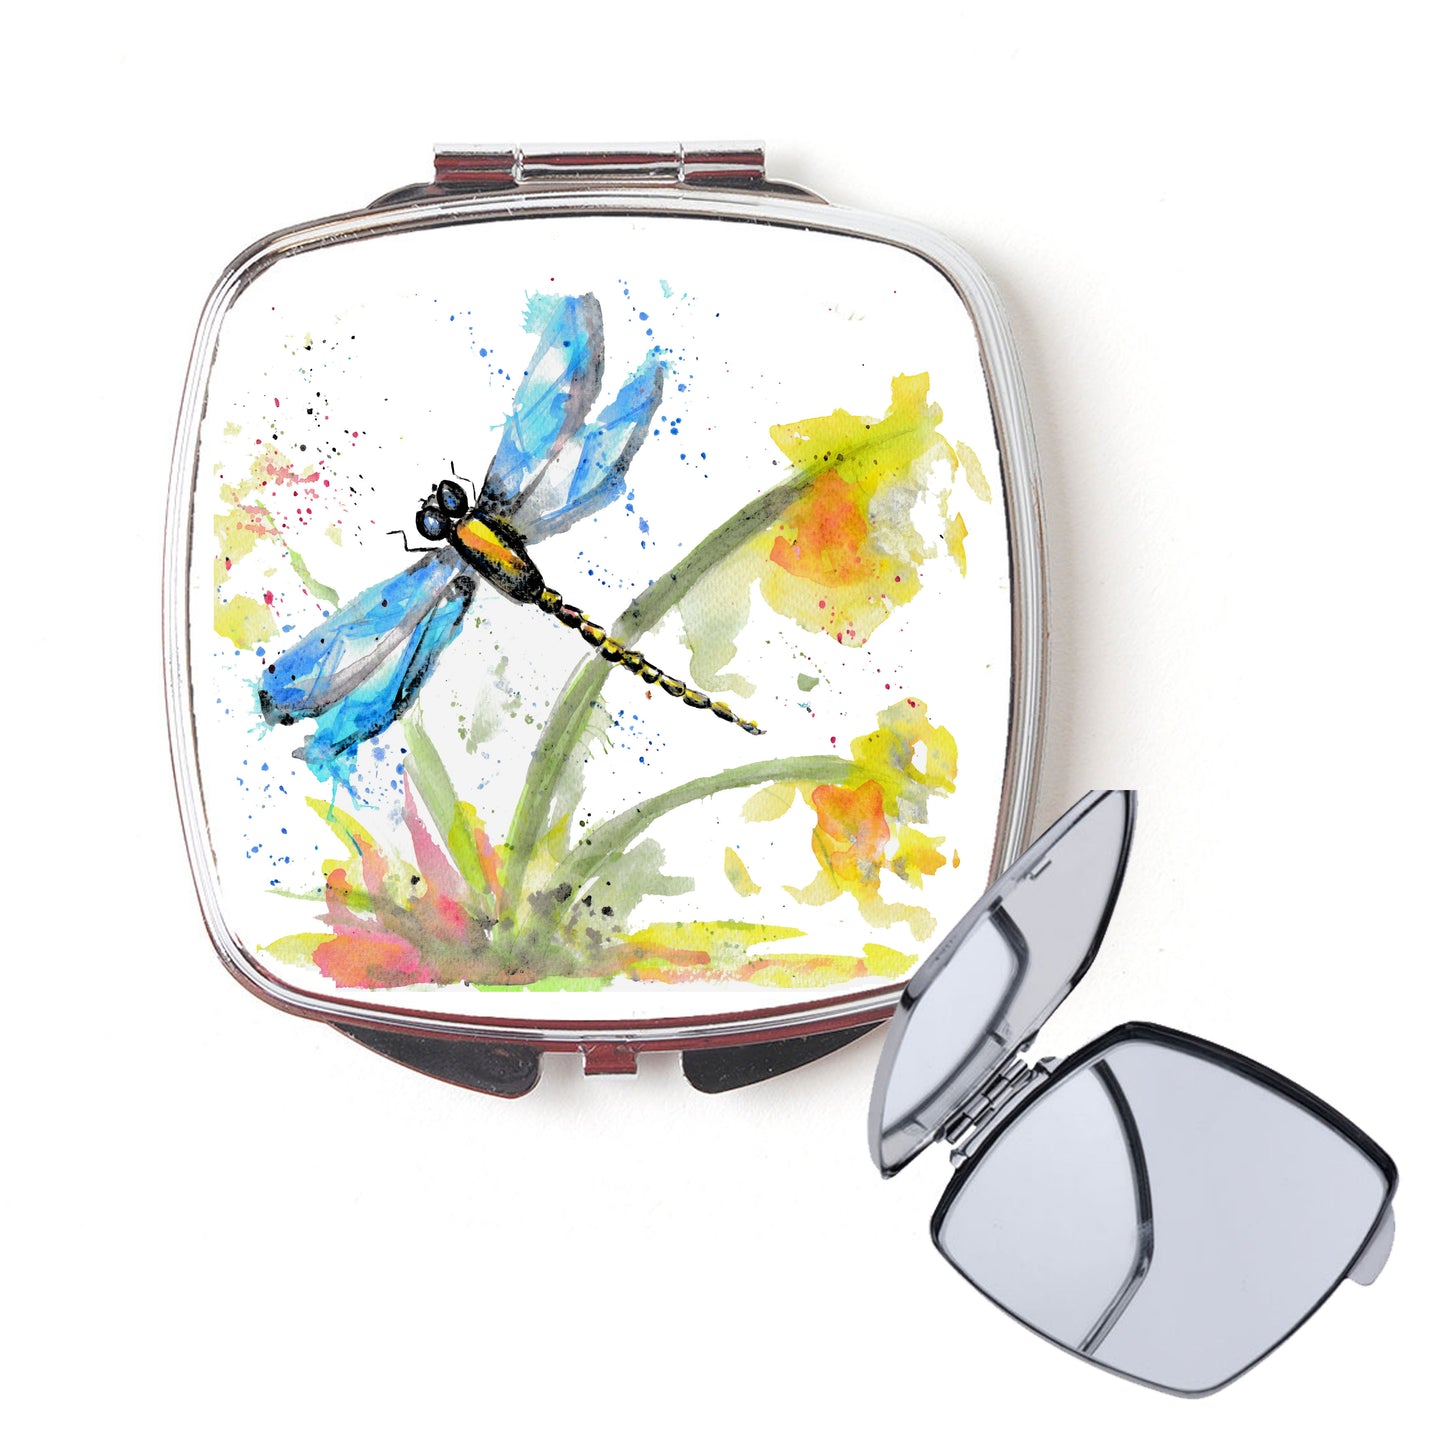 Dragonfly compact mirror